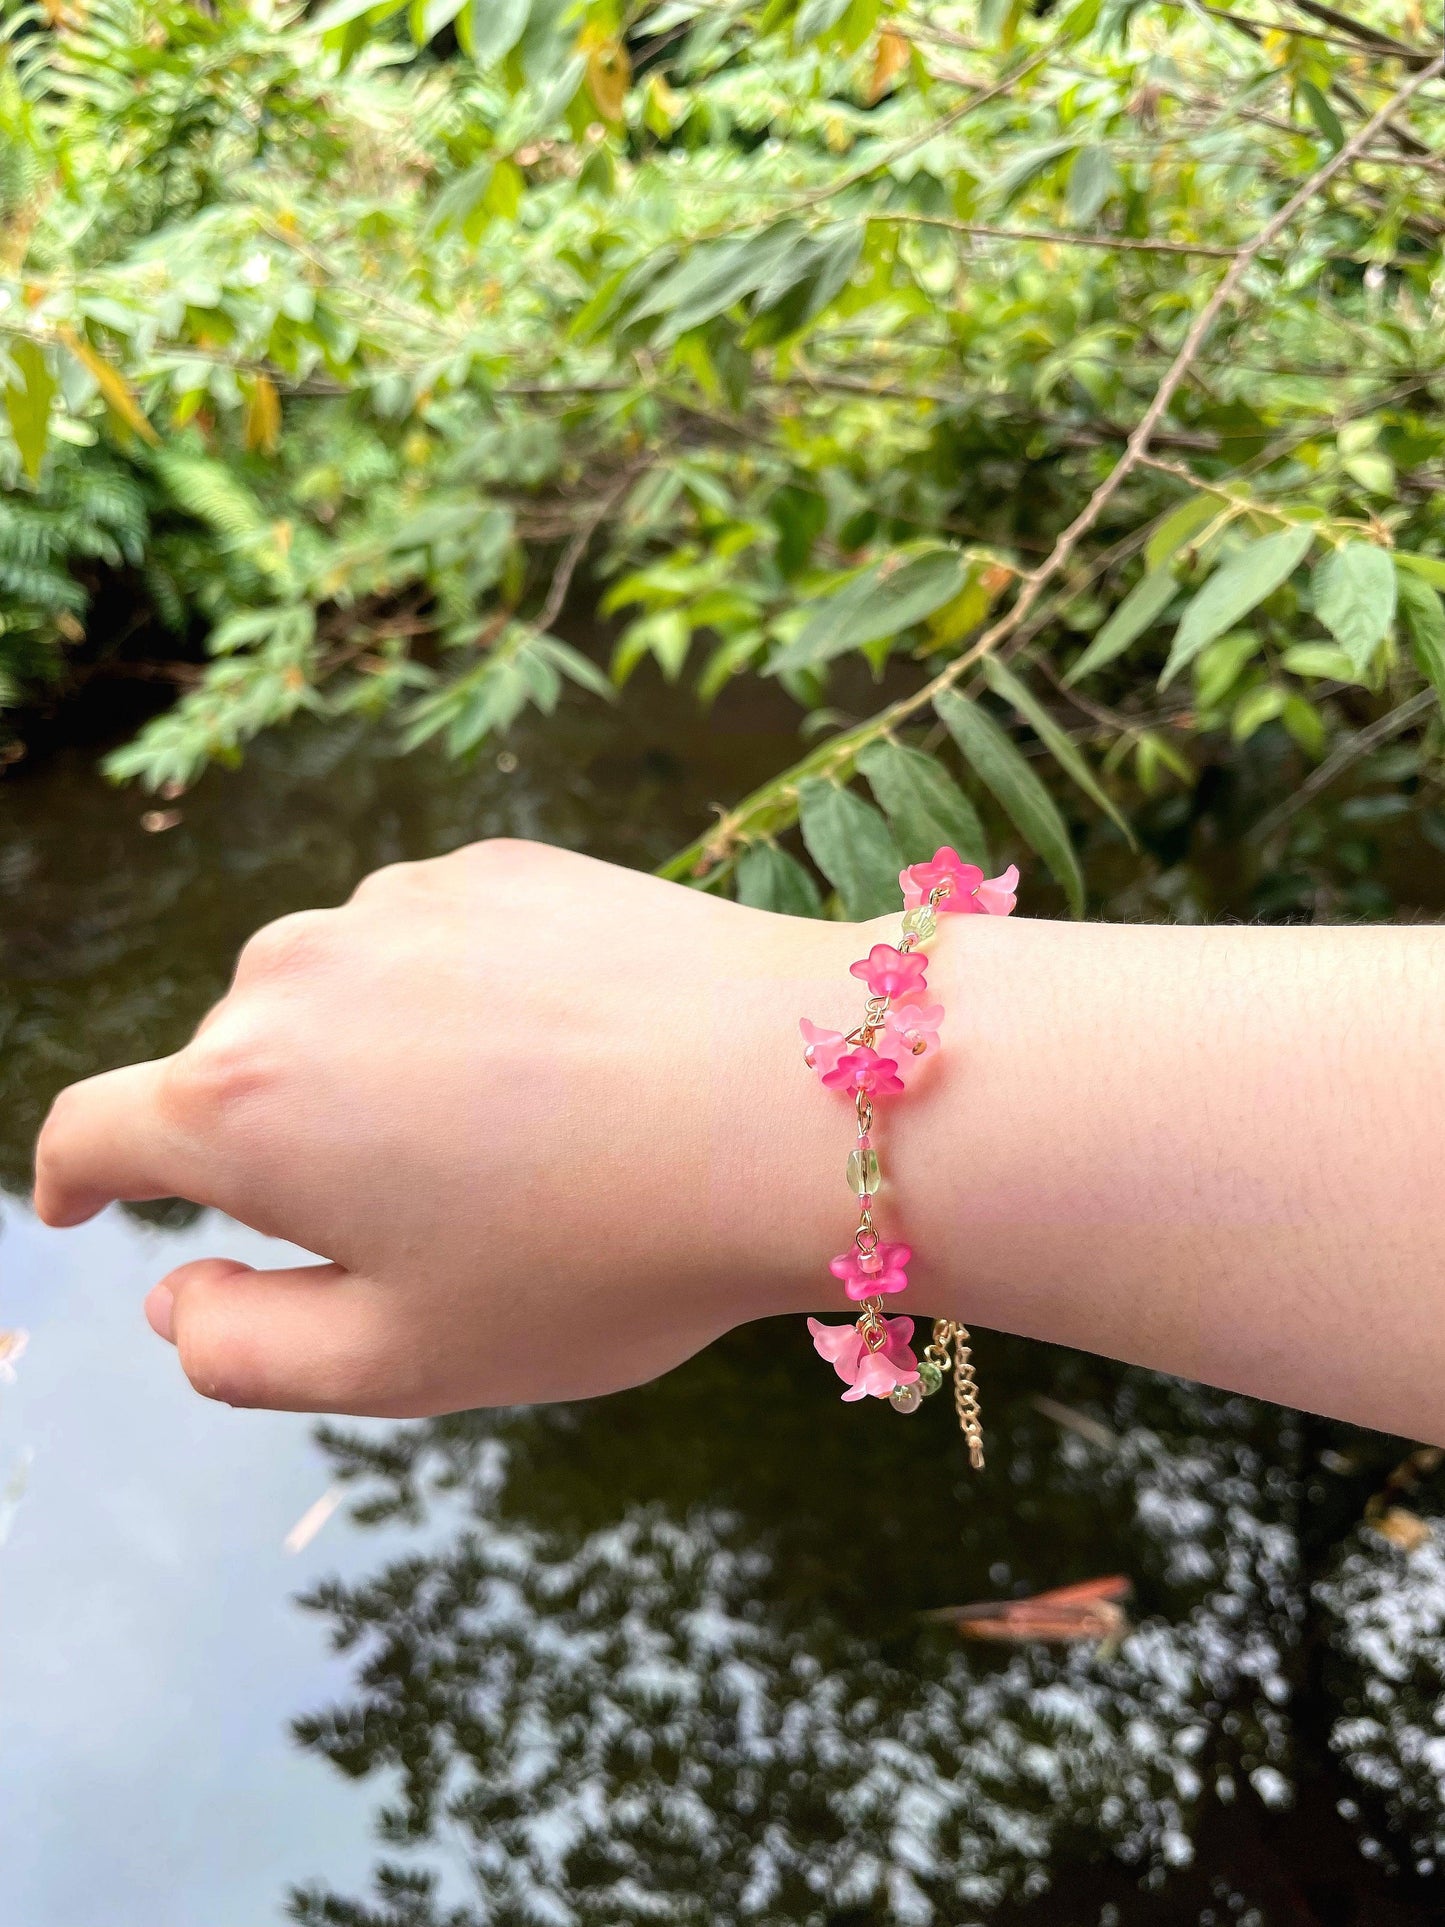 Red and Pink acrylic flowers are connected in bunches with green faceted glass beads in between to form a dainty tropical vibe bracelet.